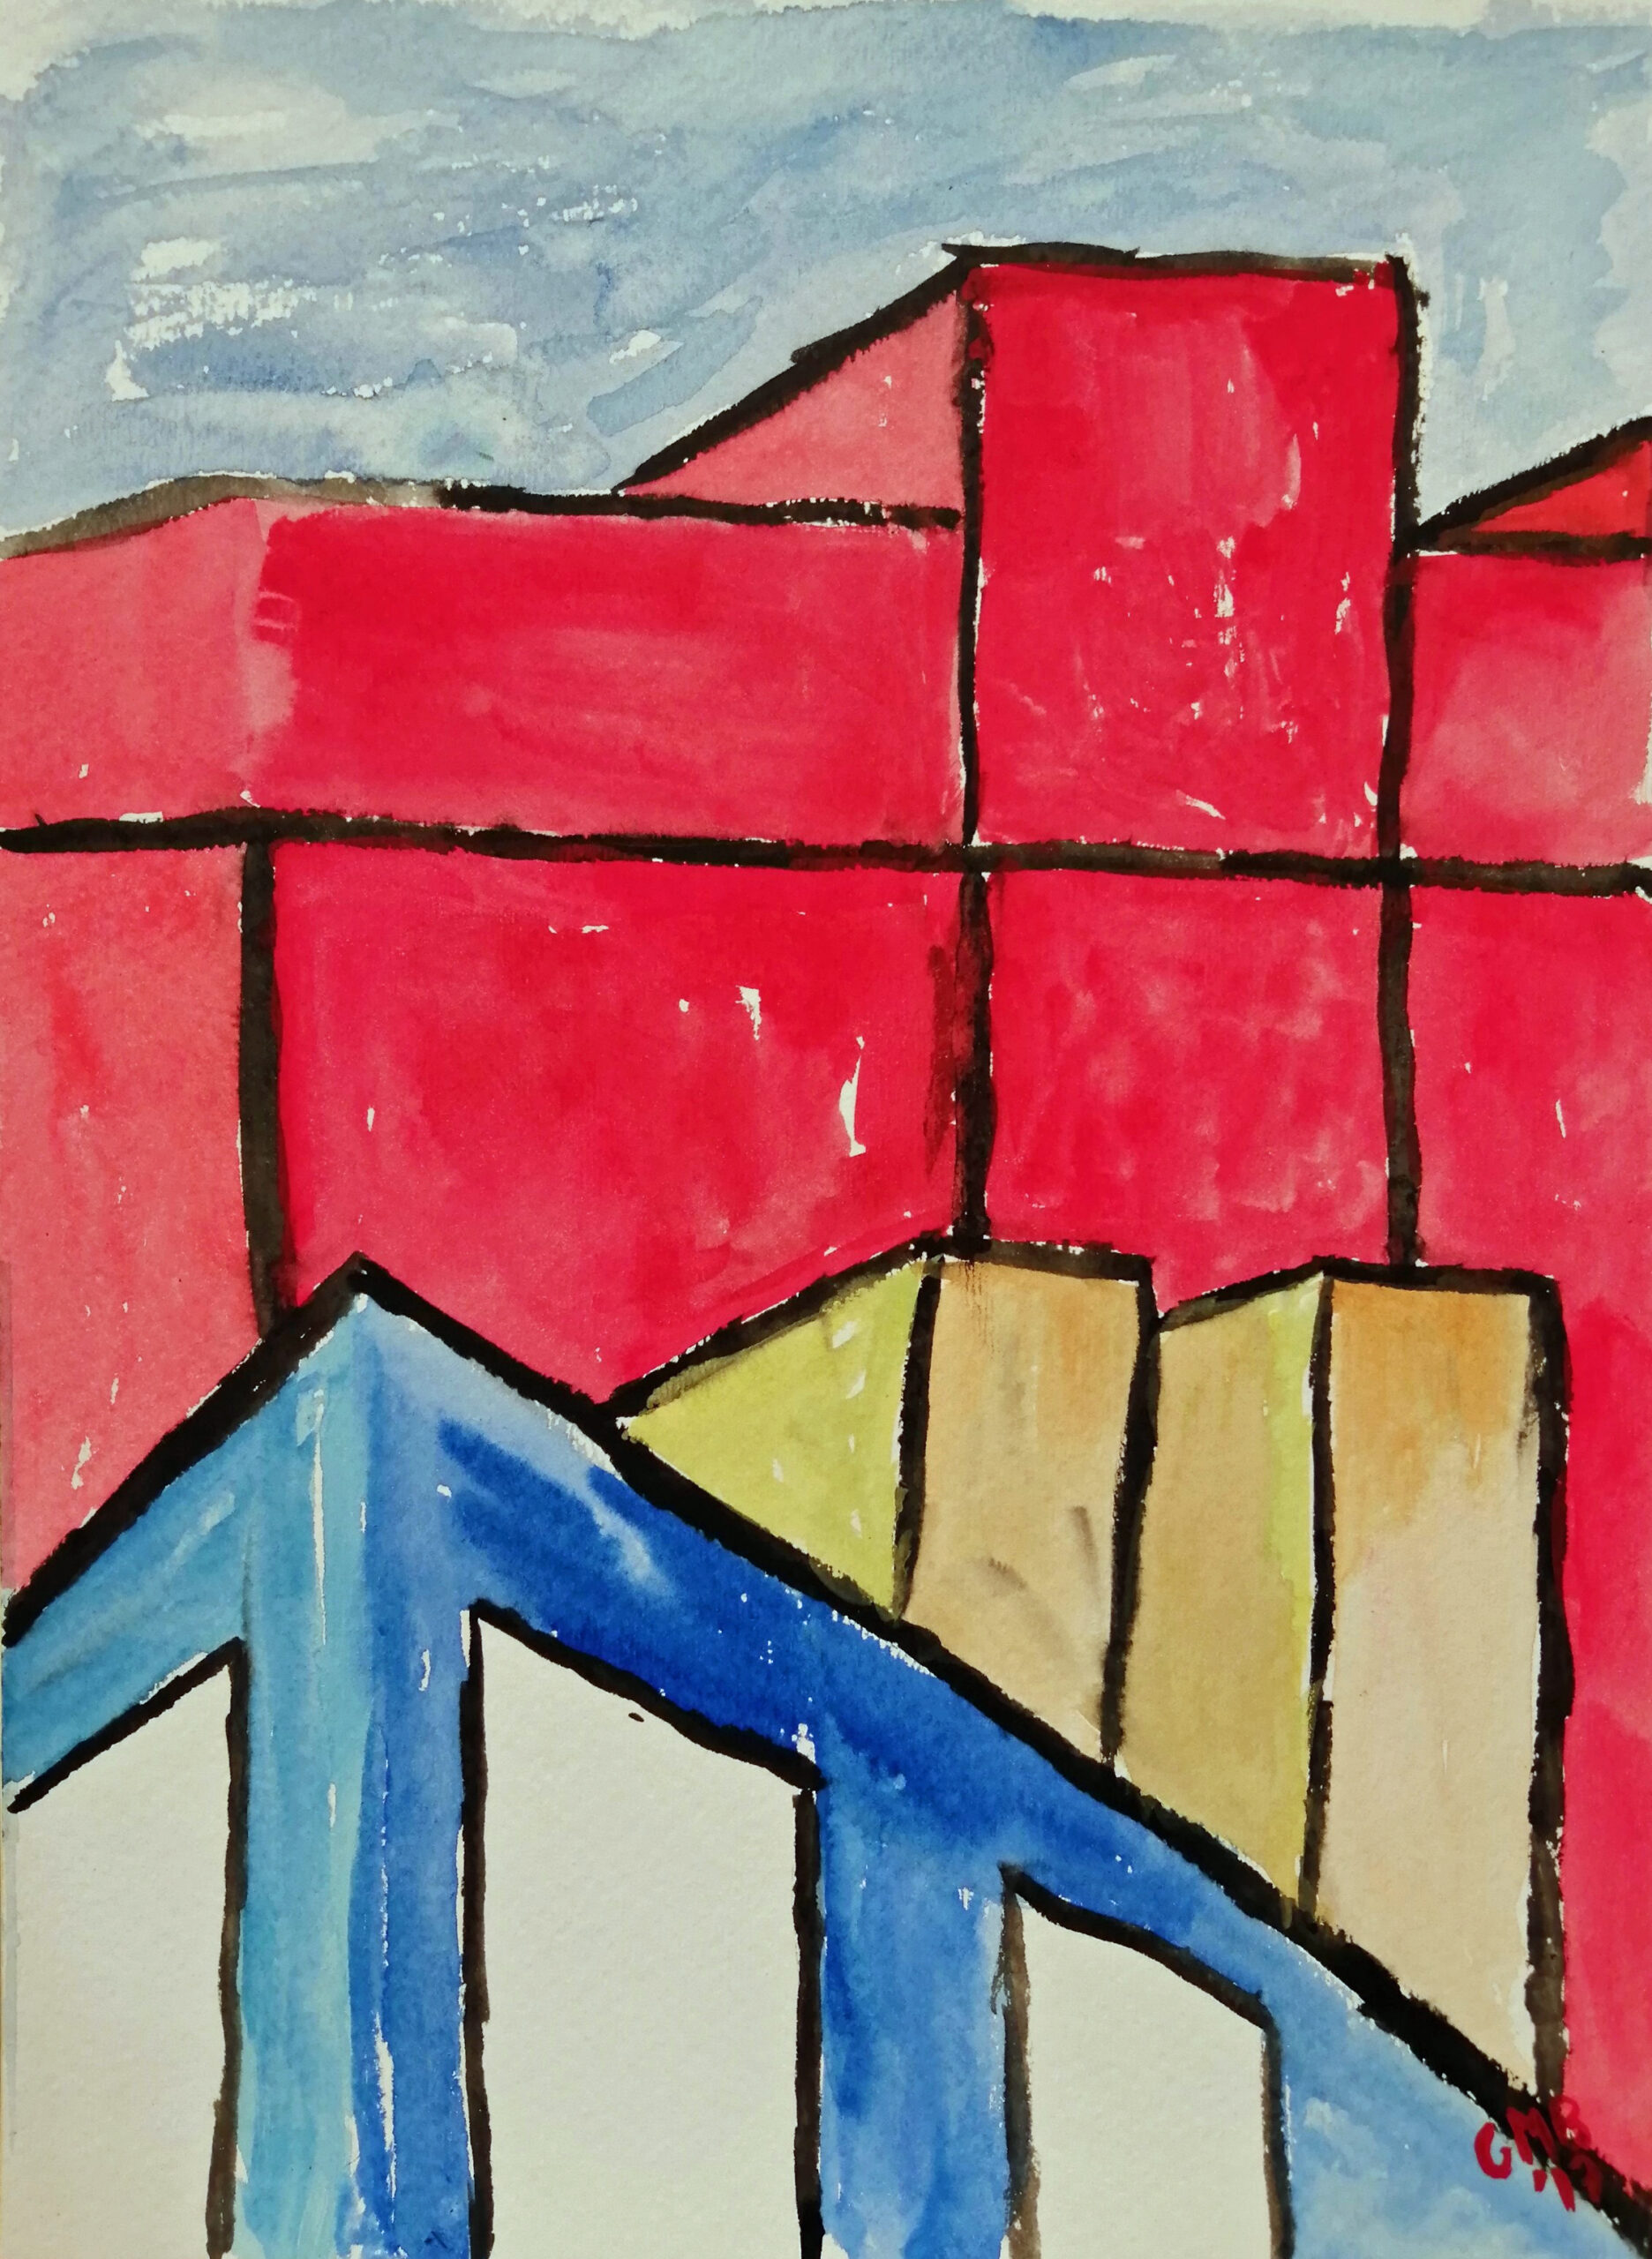 Two Factories is an abstract watercolor painting on paper using red, blue, and yellow in an absurdist fashion.